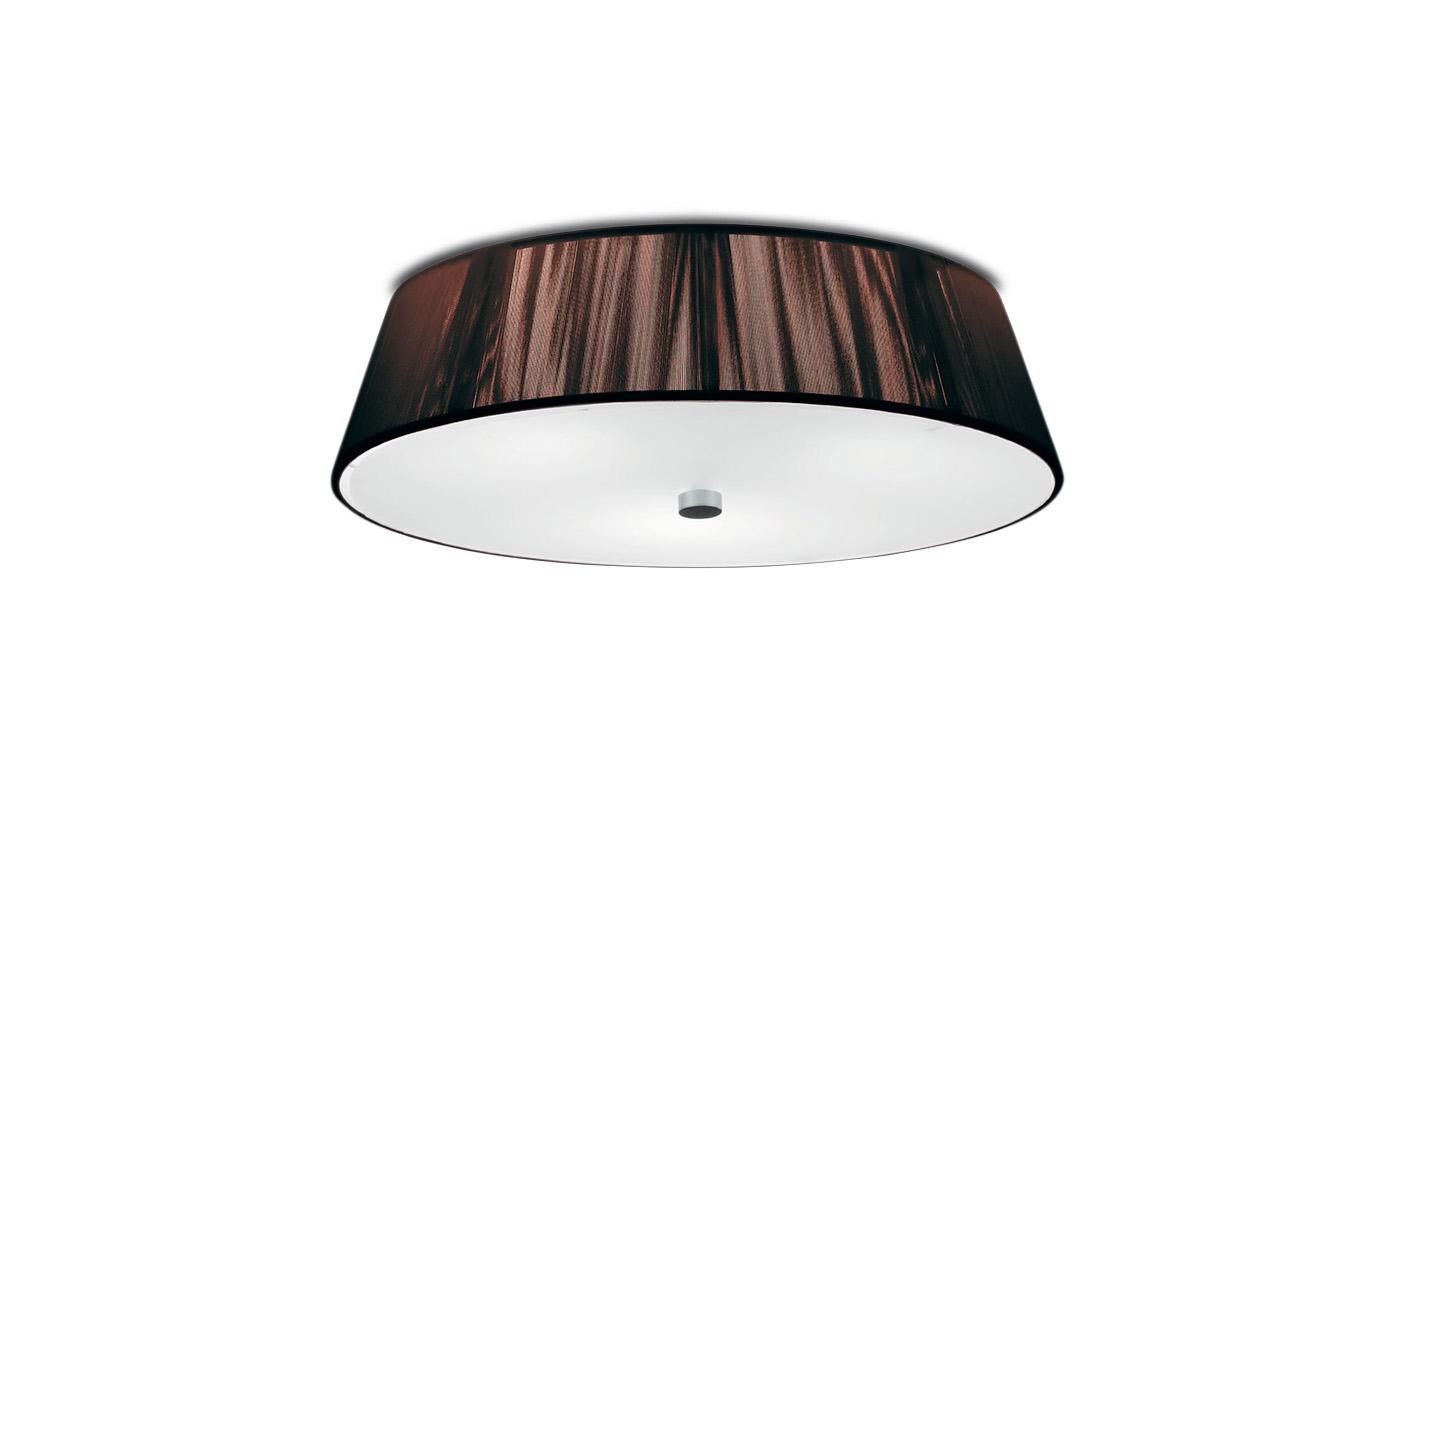 The Lilith ceiling lamp is an elegant lighting solution with a stunning light effect created by threading thin string in a consistent pattern across the shade. As you engage it from different viewpoints, the light pattern shimmers and changes. The